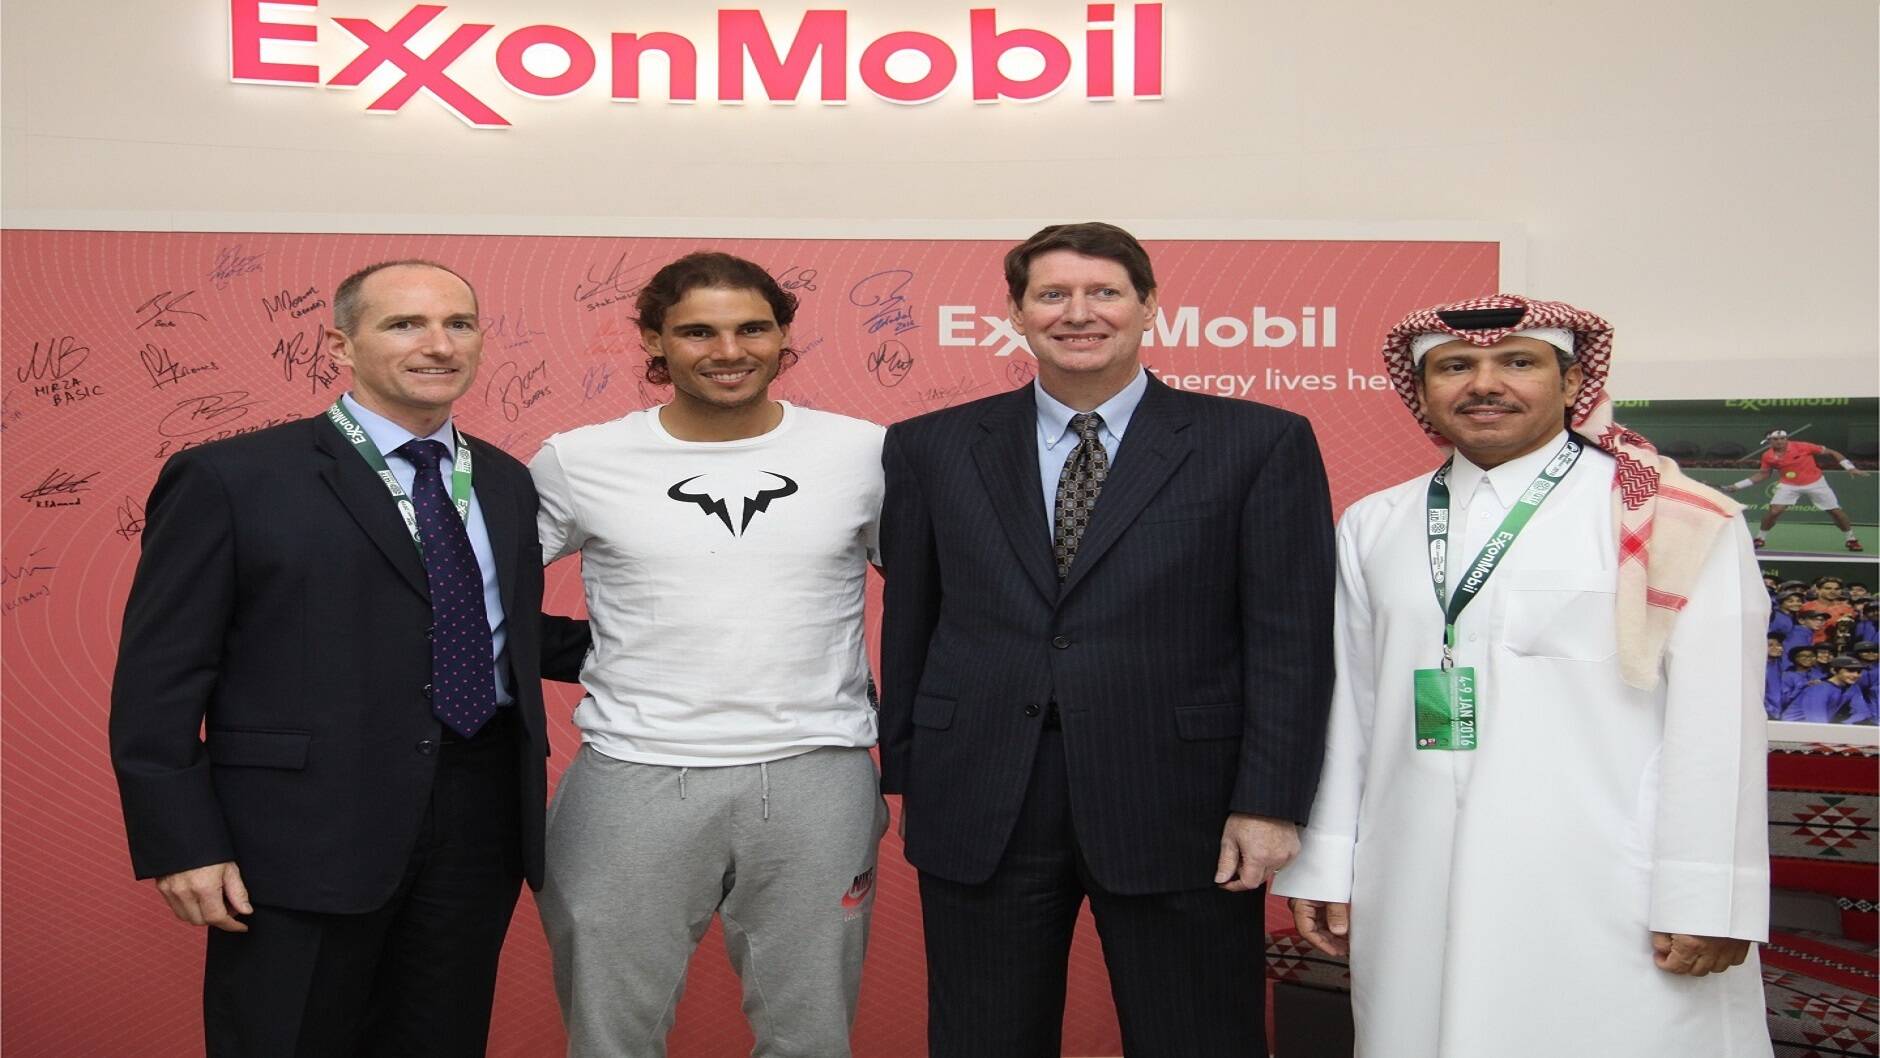 Qatar ExxonMobil Open 2016 second-place finisher Rafael Nadal with Alistair Routledge, President and General Manager for ExxonMobil Qatar; Andrew P. Swiger, Senior Vice President of Exxon Mobil Corporation; and Saleh Al-Mana, Vice President and Director of Government and Public Affairs at ExxonMobil Qatar, inside ExxonMobil Qatar’s stand in the Public Village.